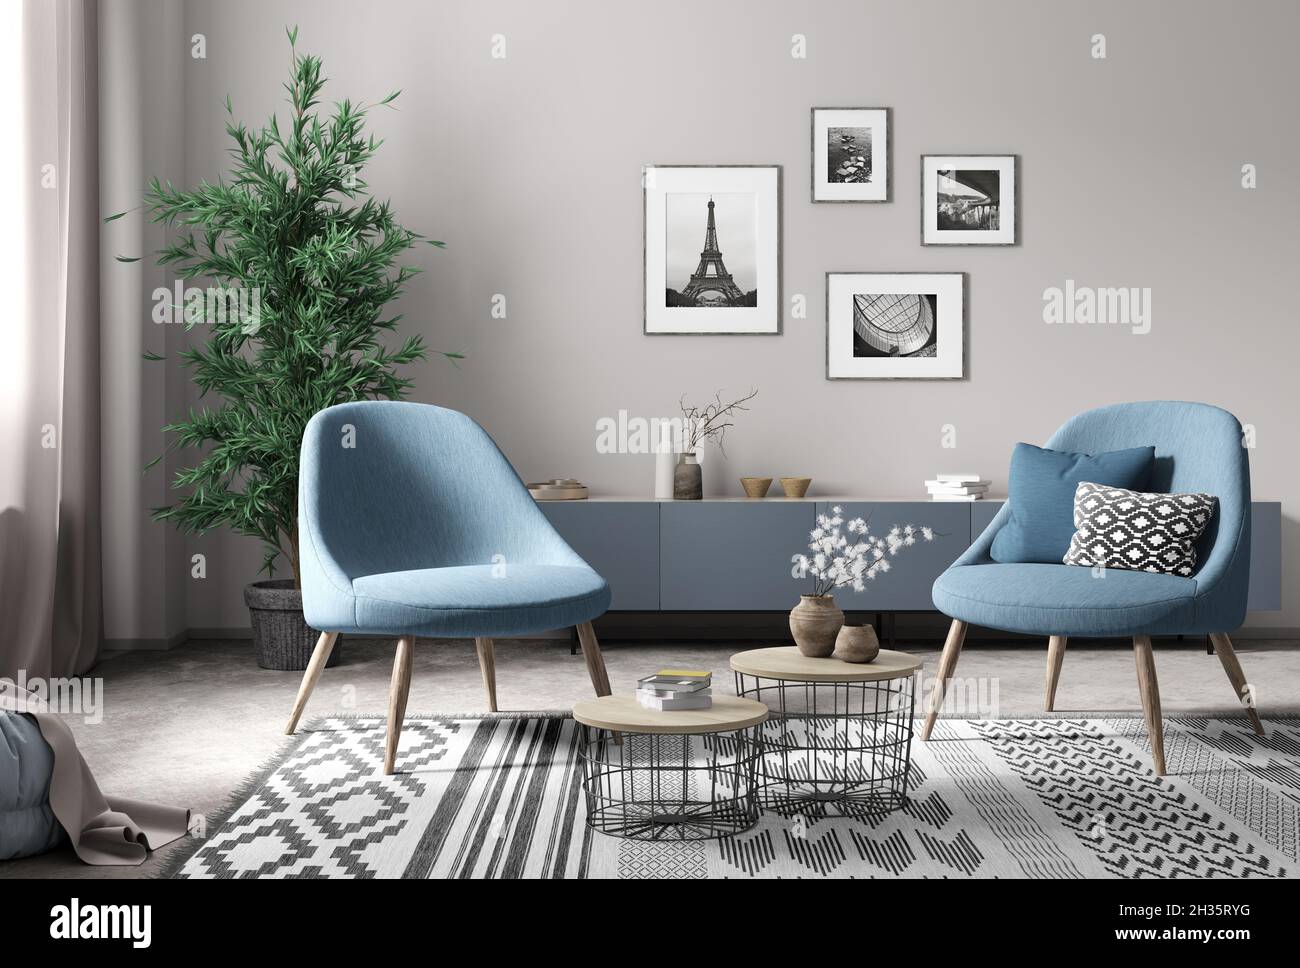 Home interior with two chairs and four Louis Vuitton trunks on the floor  Stock Photo - Alamy